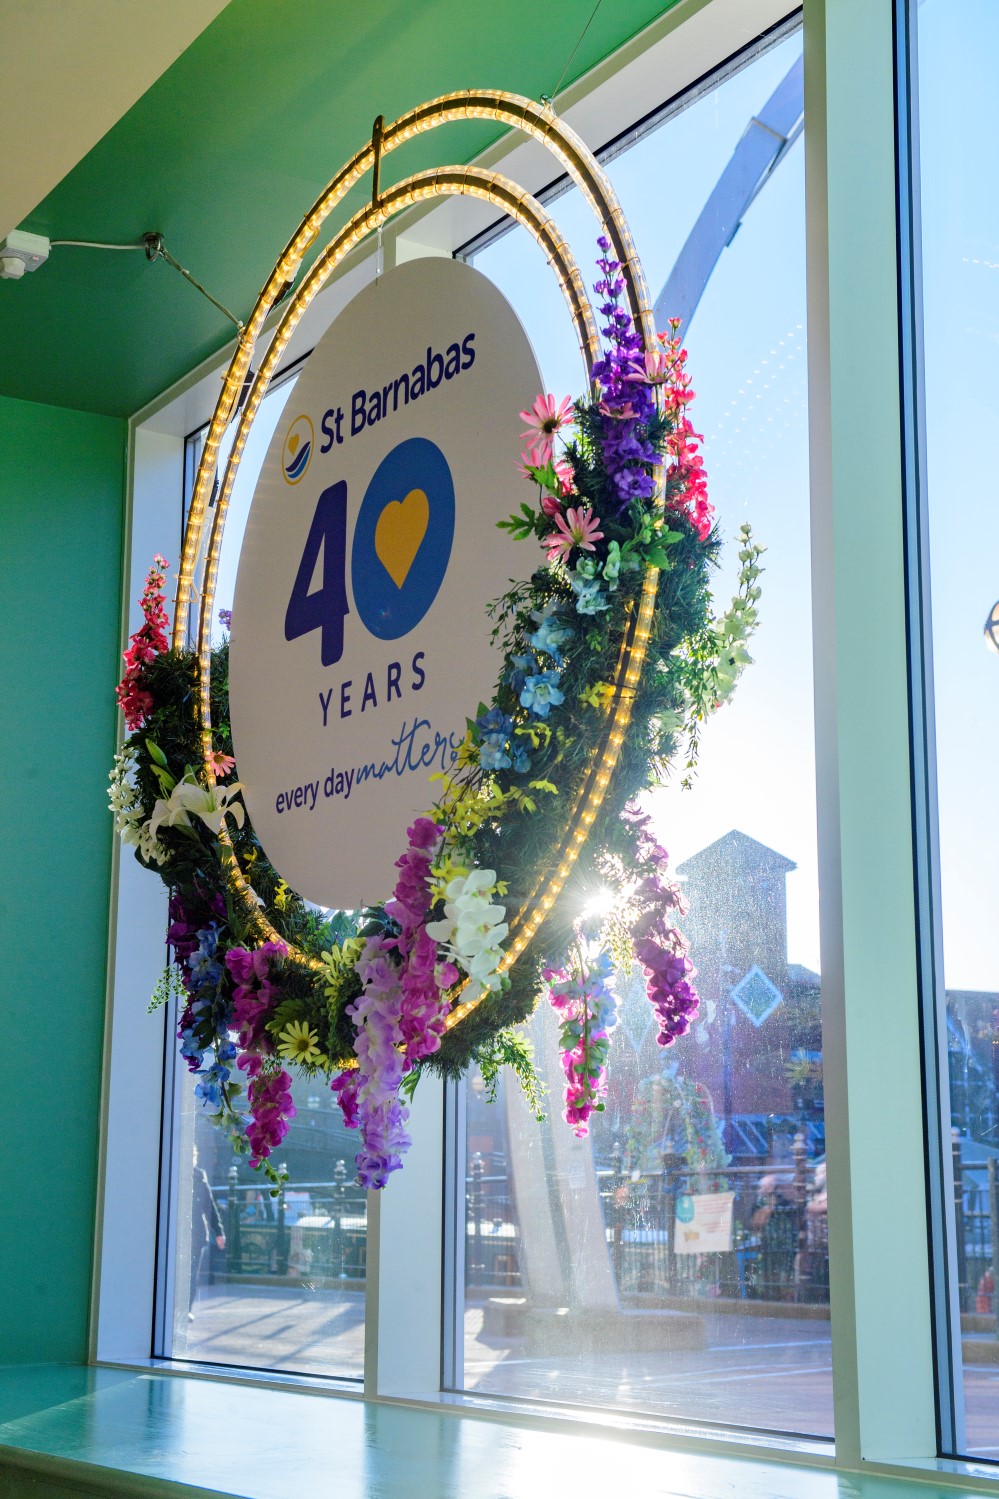 Light up floral wreath with purple, pink, blue, yellow, green, and white flowers around St Barnabas 40 year anniversary sign in the Waterside Shopping Centre, Lincoln.